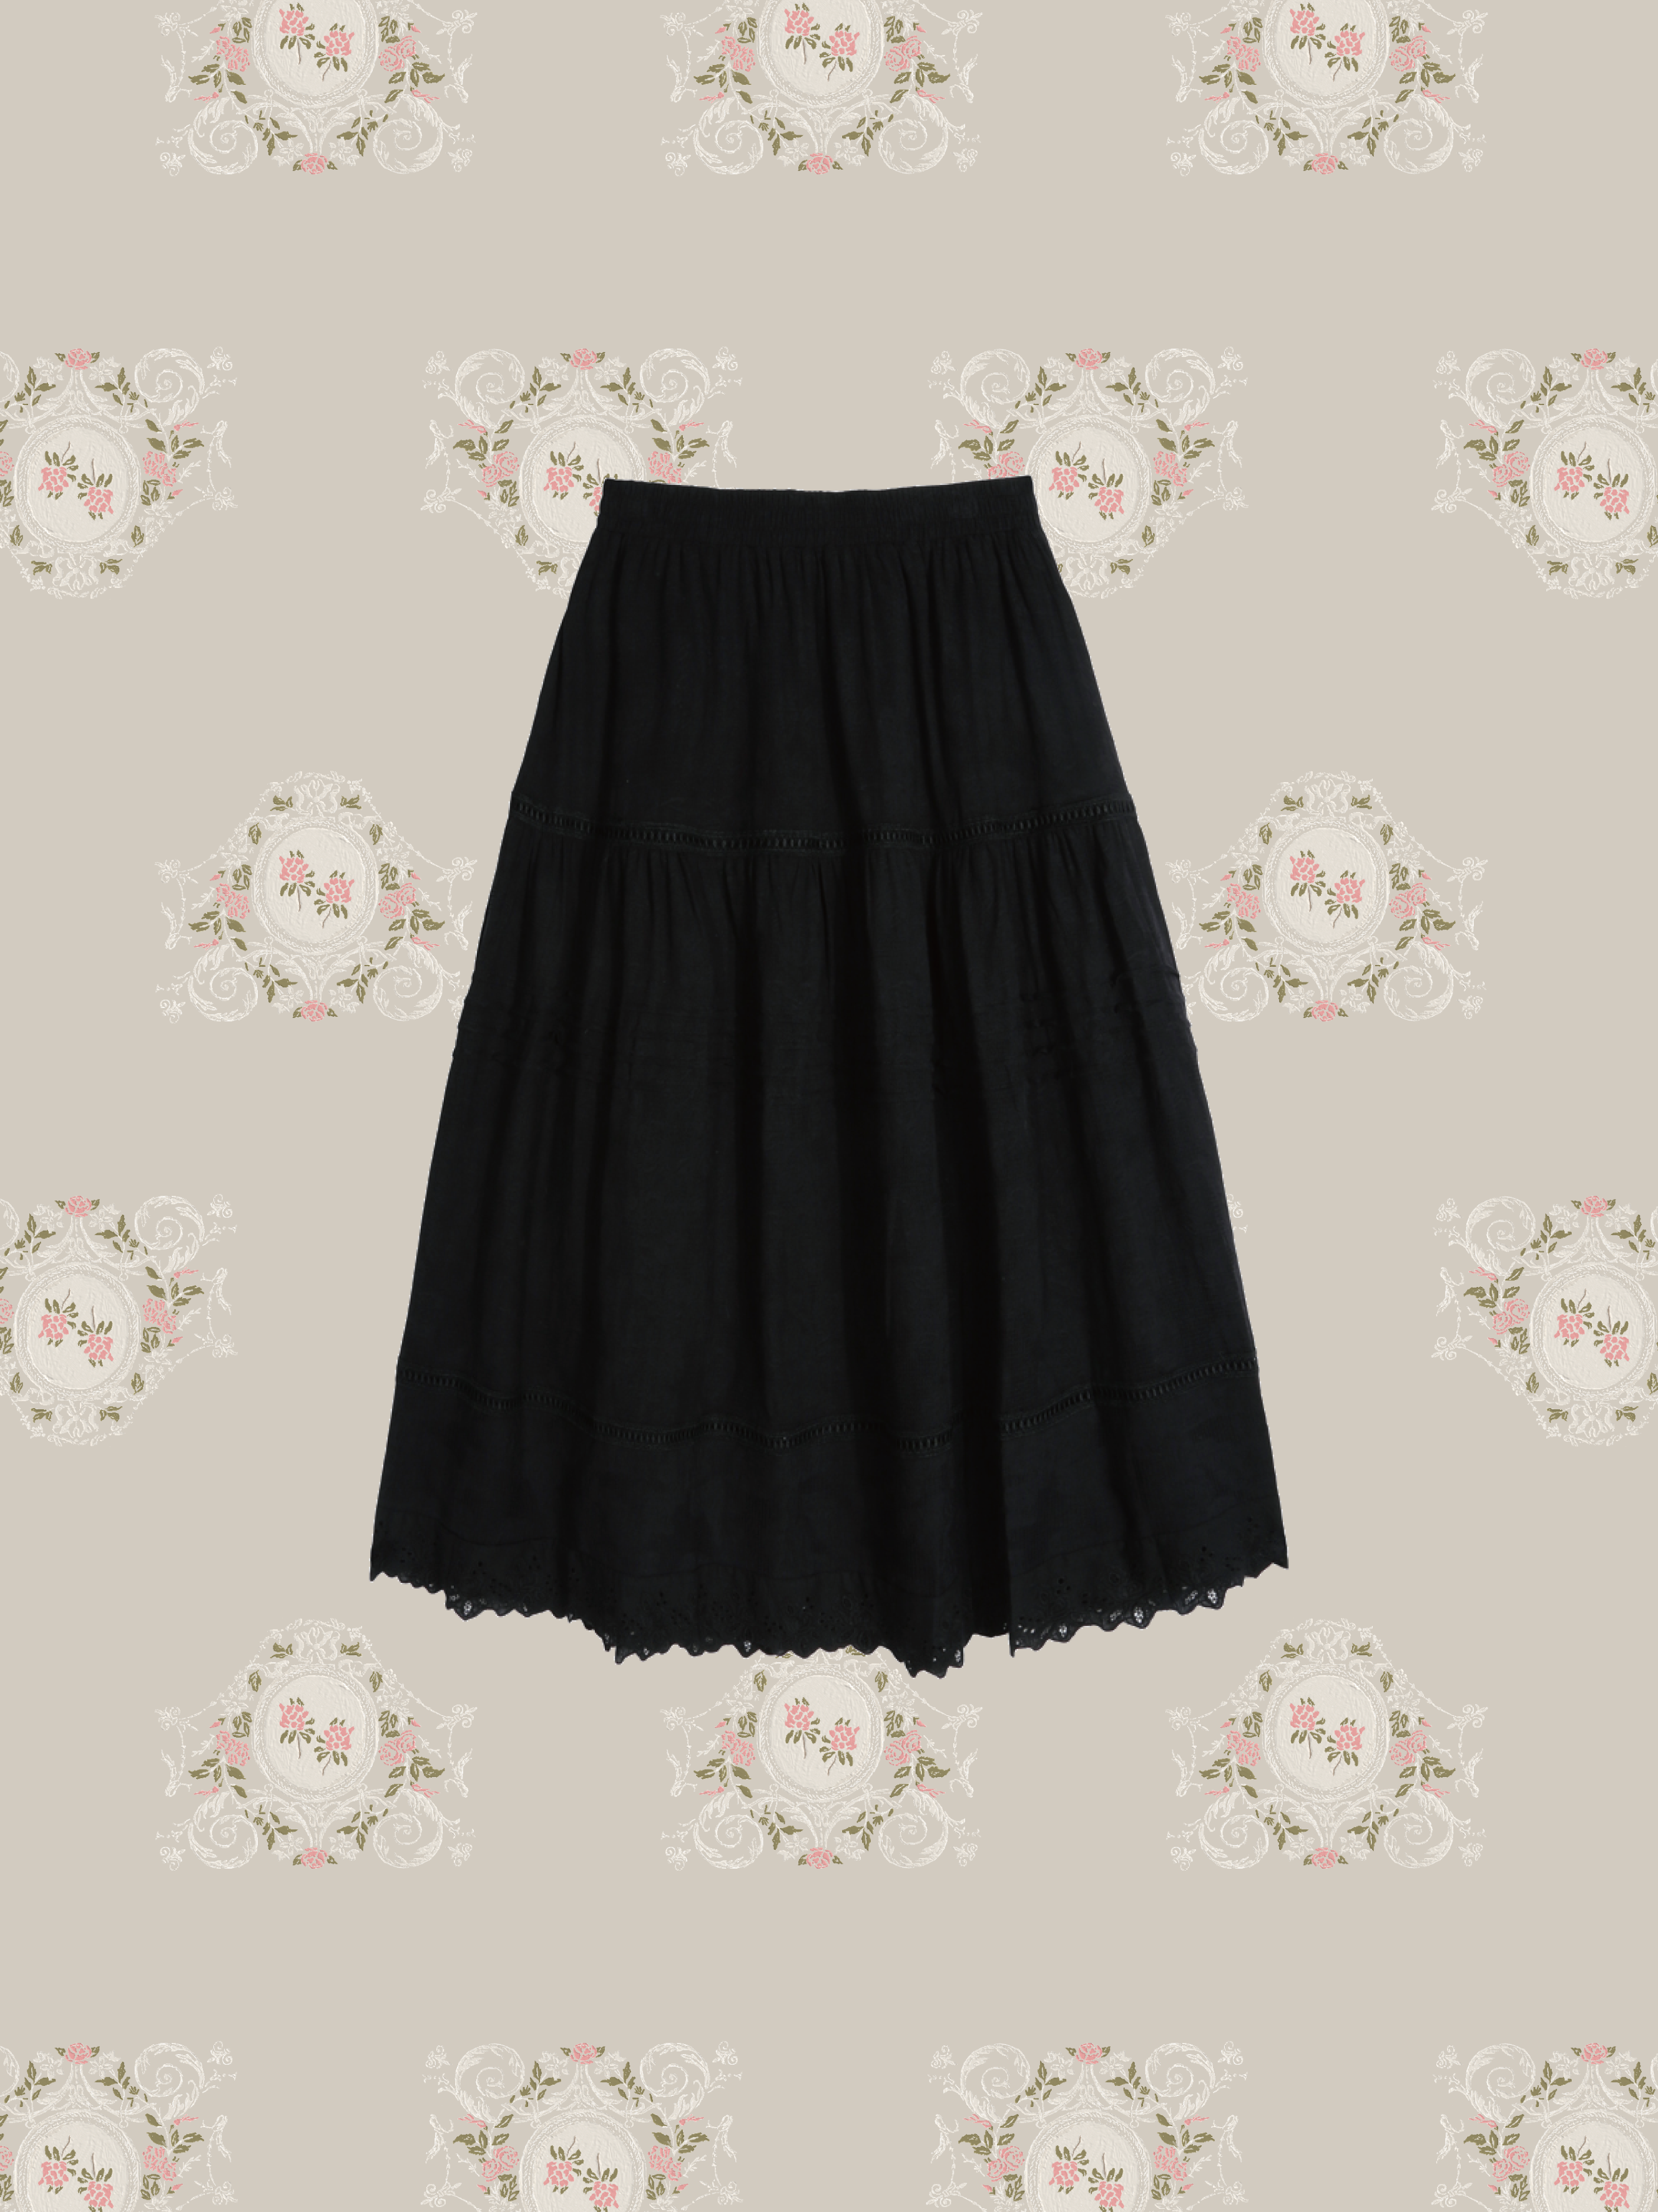 Flare Hollow Out Embroidery Skirt/フレア刺繍スカート